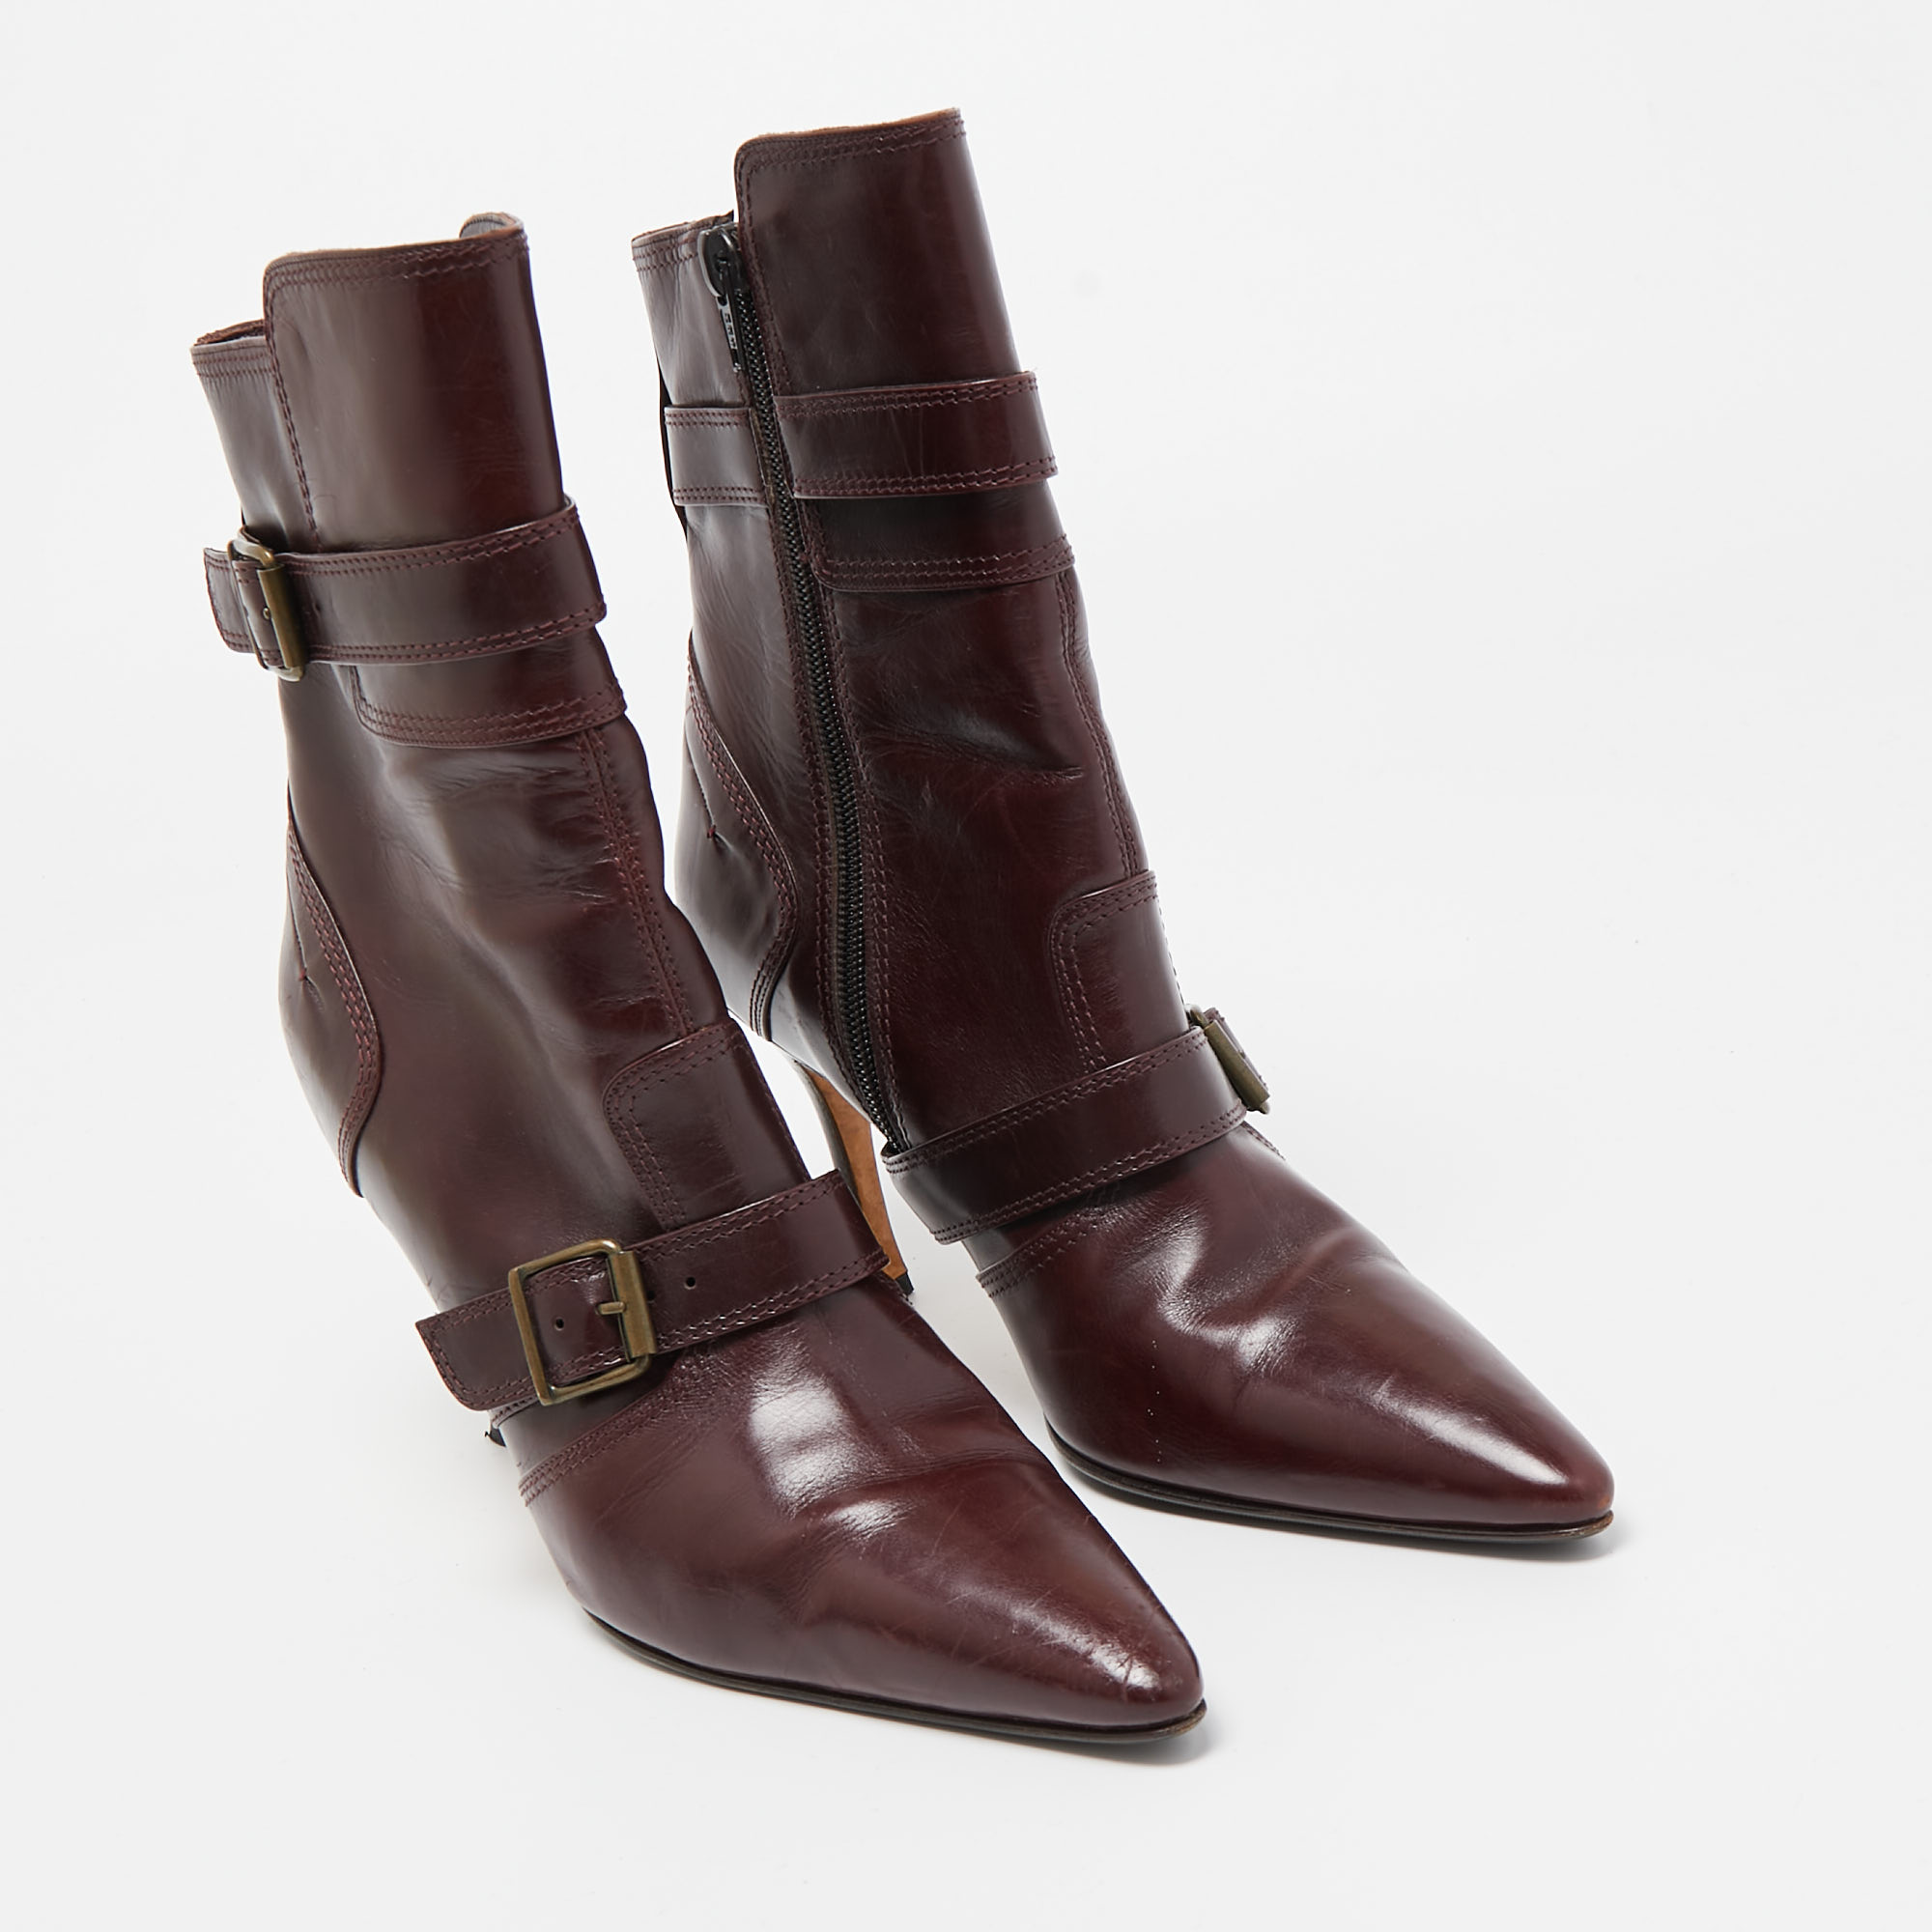 Manolo Blahnik Burgundy Leather Ankle Boots Size 37.5